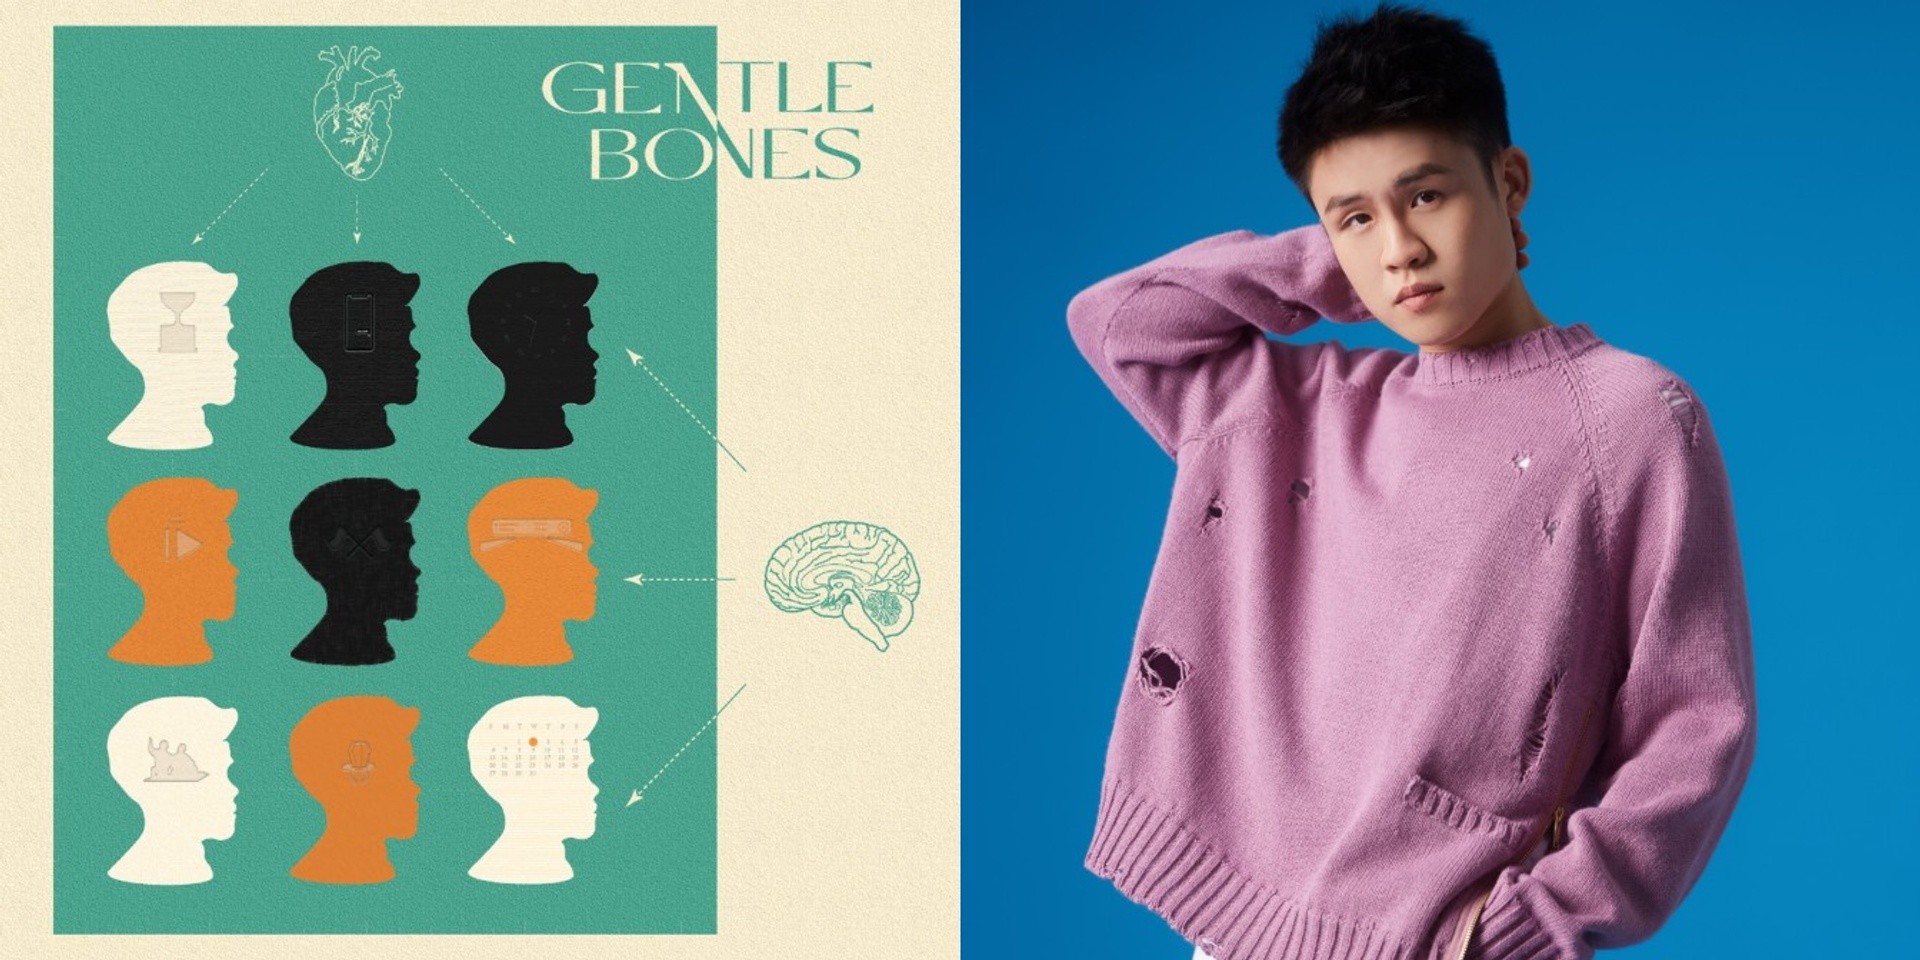 After 8 years, Gentle Bones announces debut album with tracks from Jasmine Sokko and lewloh